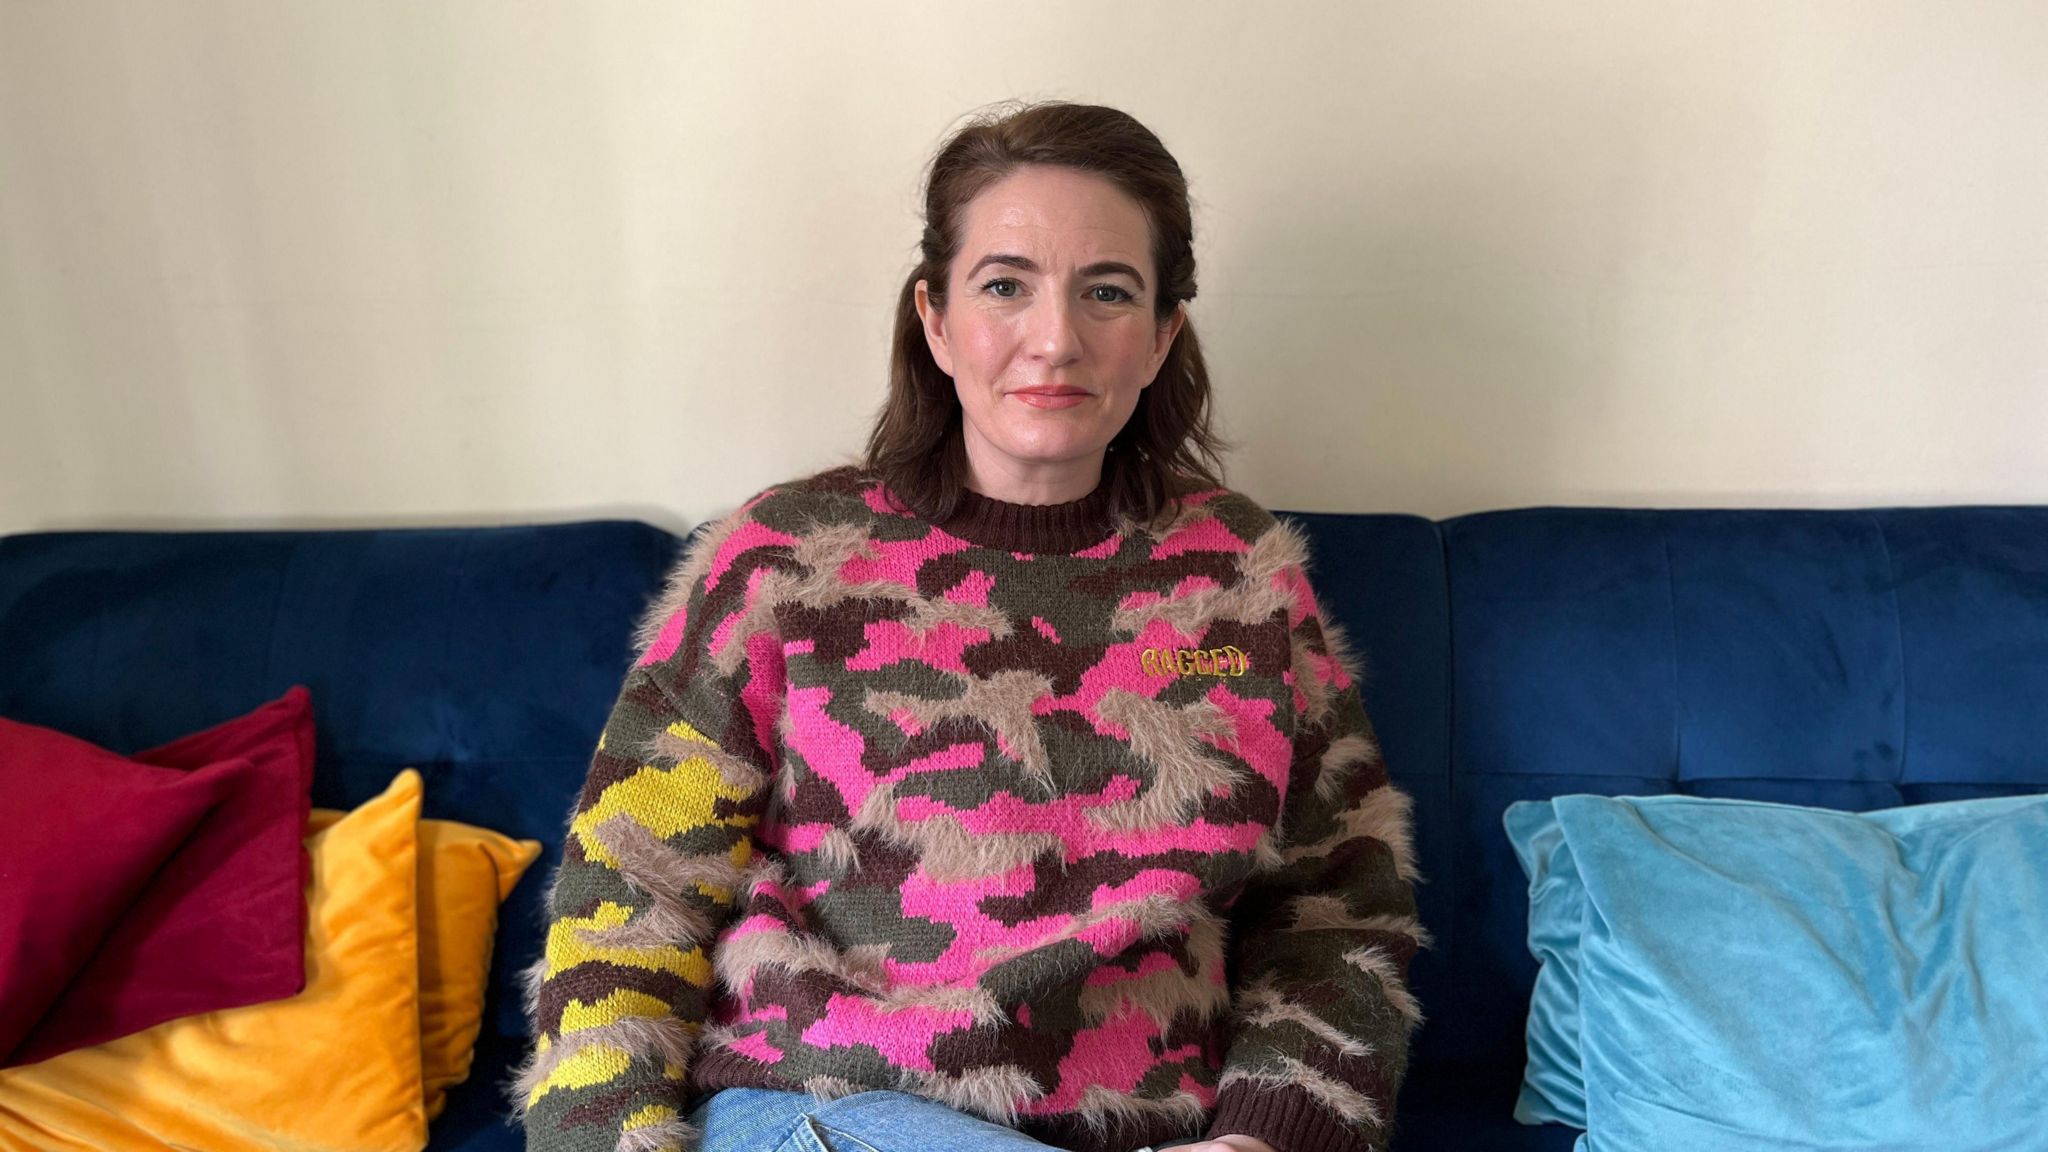 Susie Barrass sat on the sofa in a pink and grey jumper